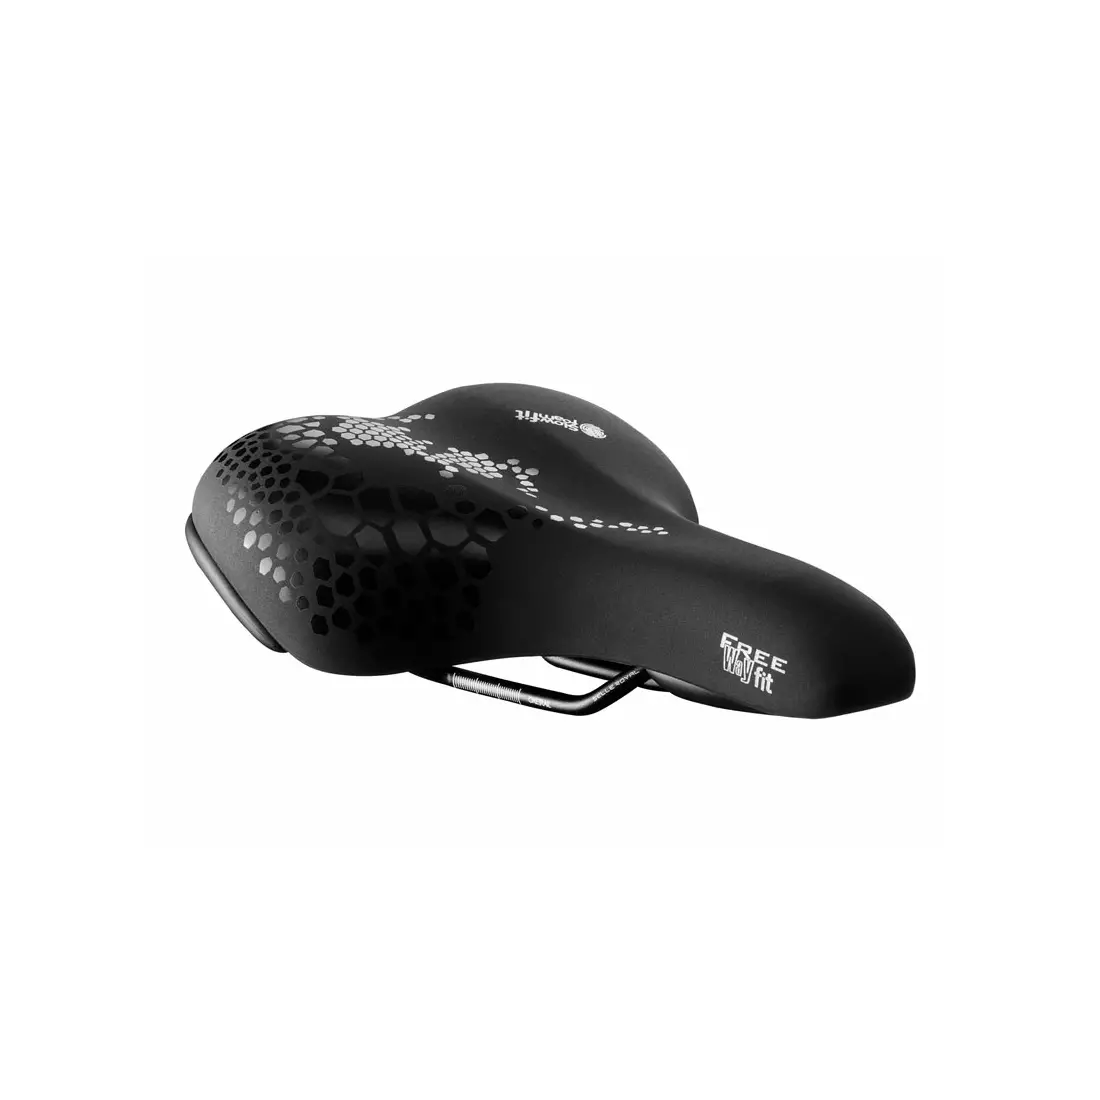 SELLEROYAL CLASSIC MODERATE bicycle saddle 60st. FREEWAY FIT women SR-8V97DR0A08069